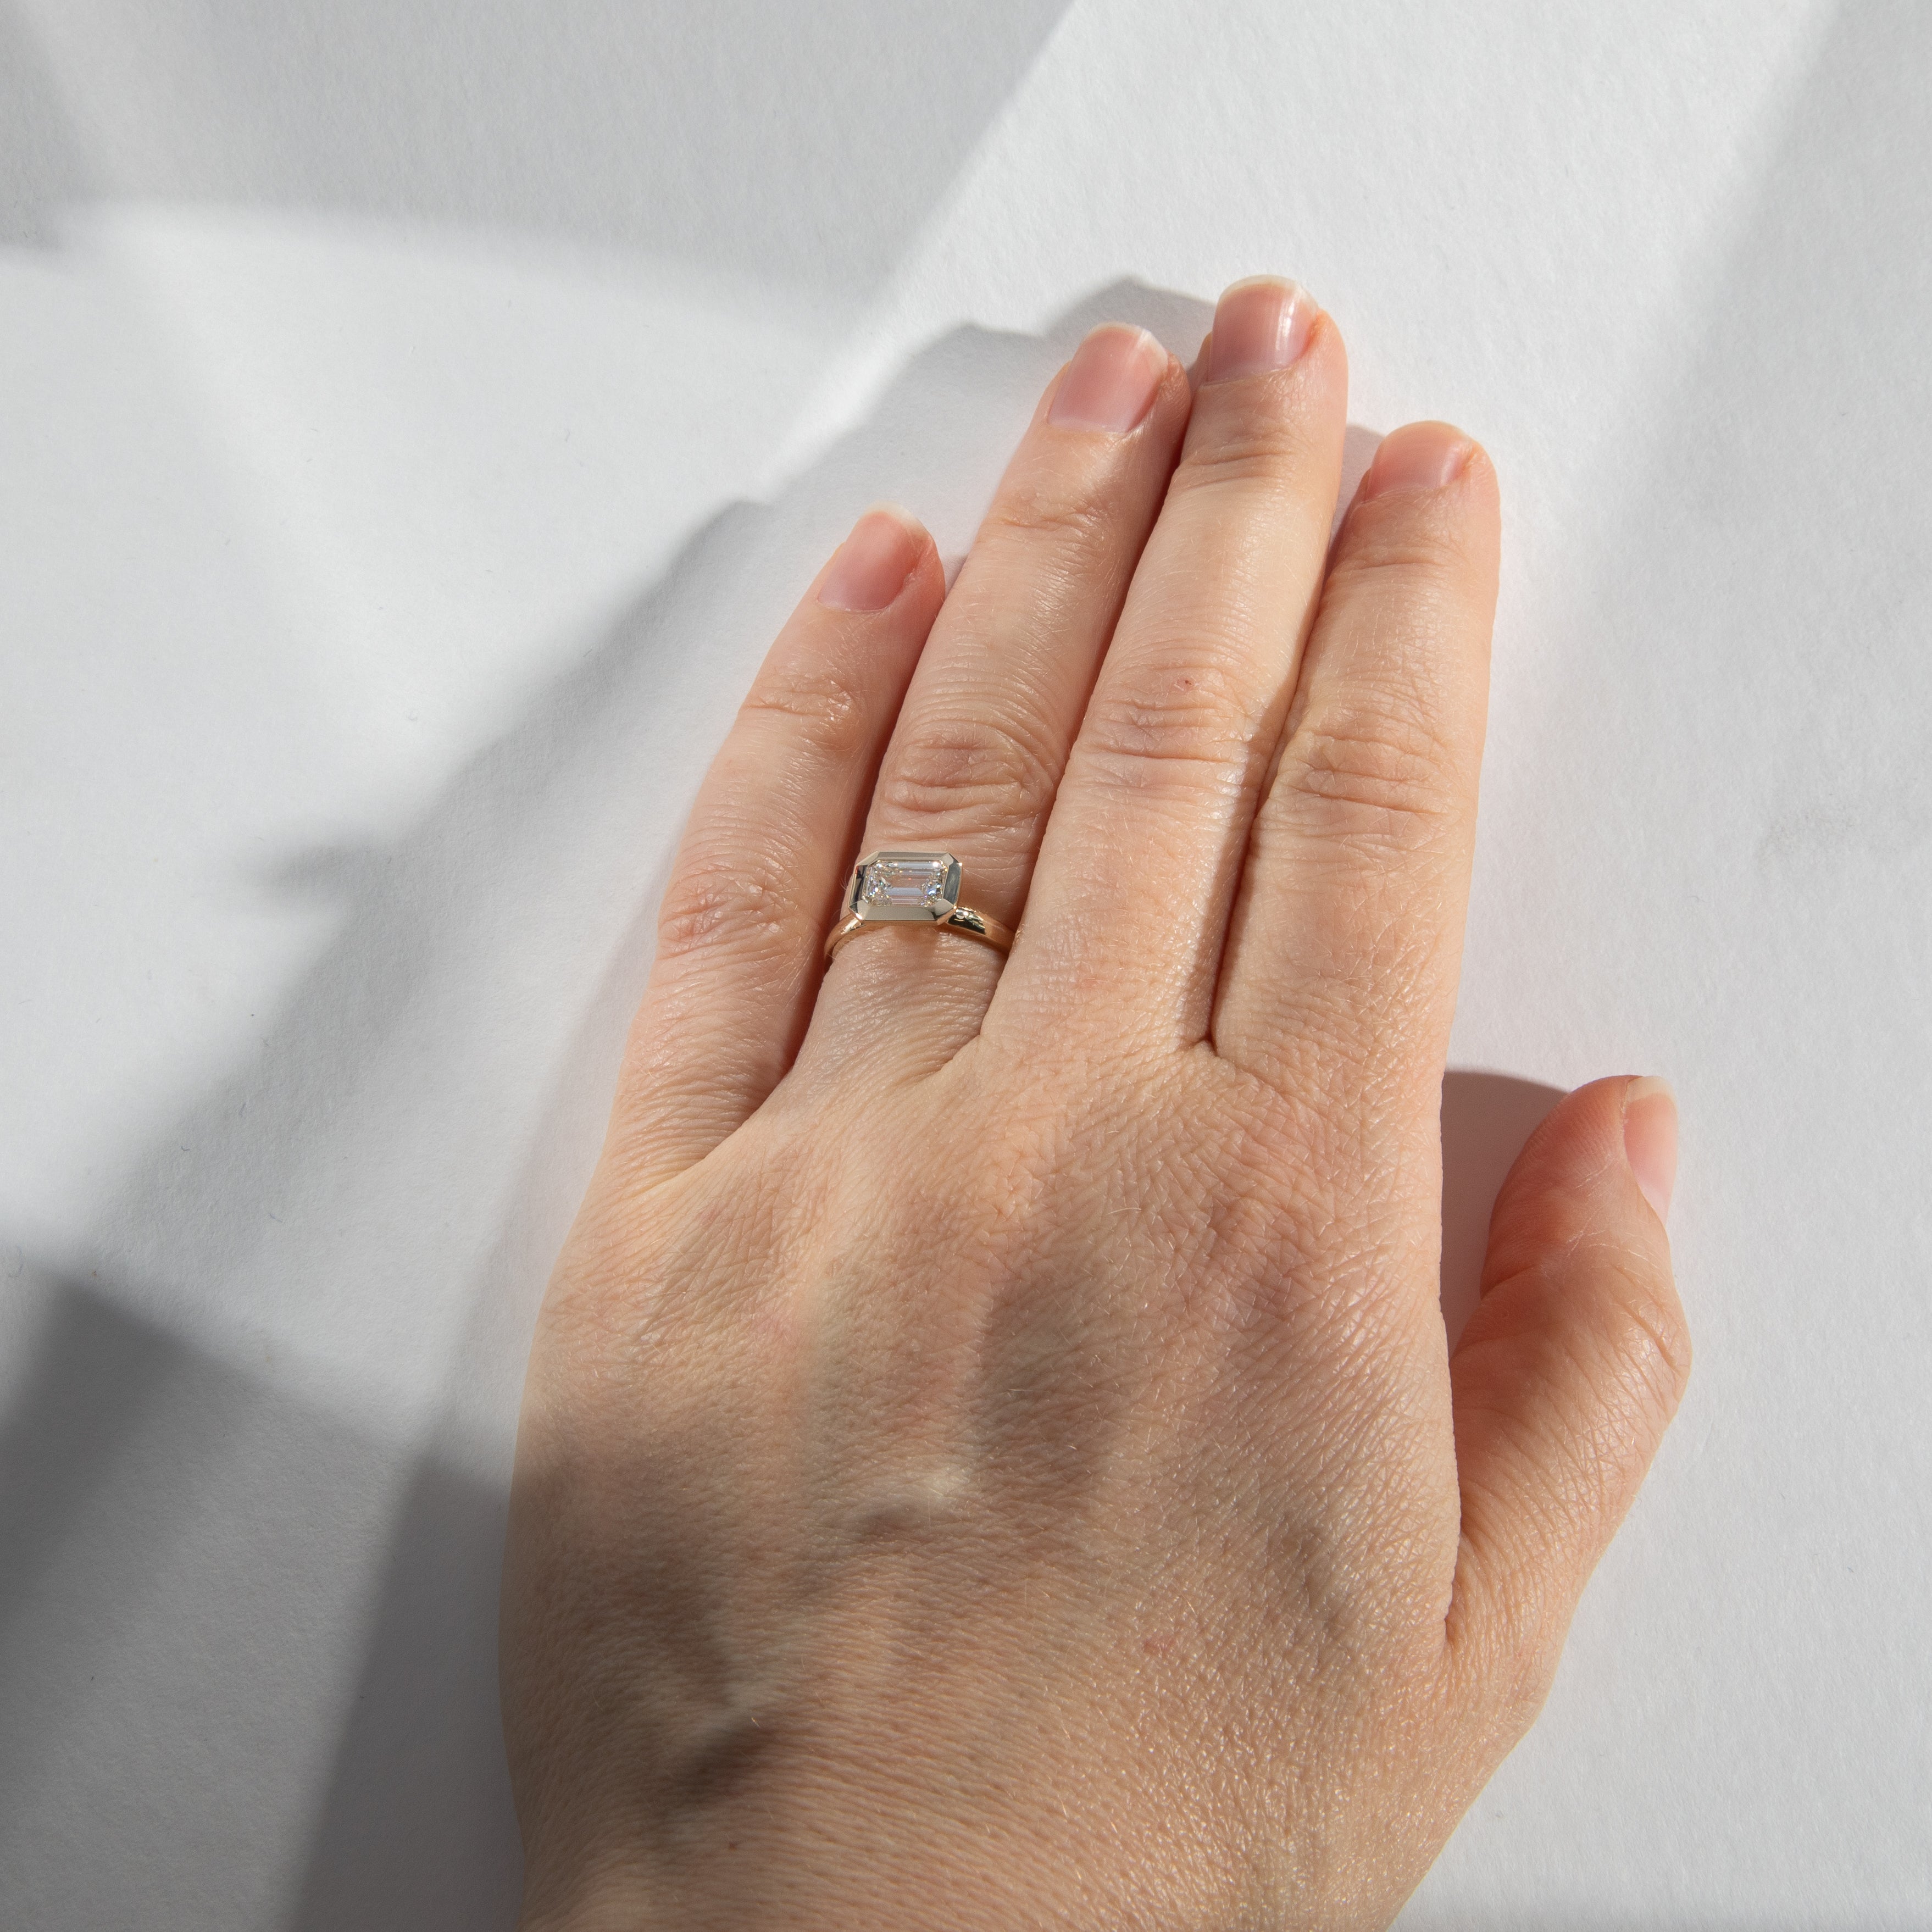 Handmade Vilke Ring in 14k Yellow Gold With 1.02ct ethical Lab-grown Diamond made in NYC by SHW fine Jewelry